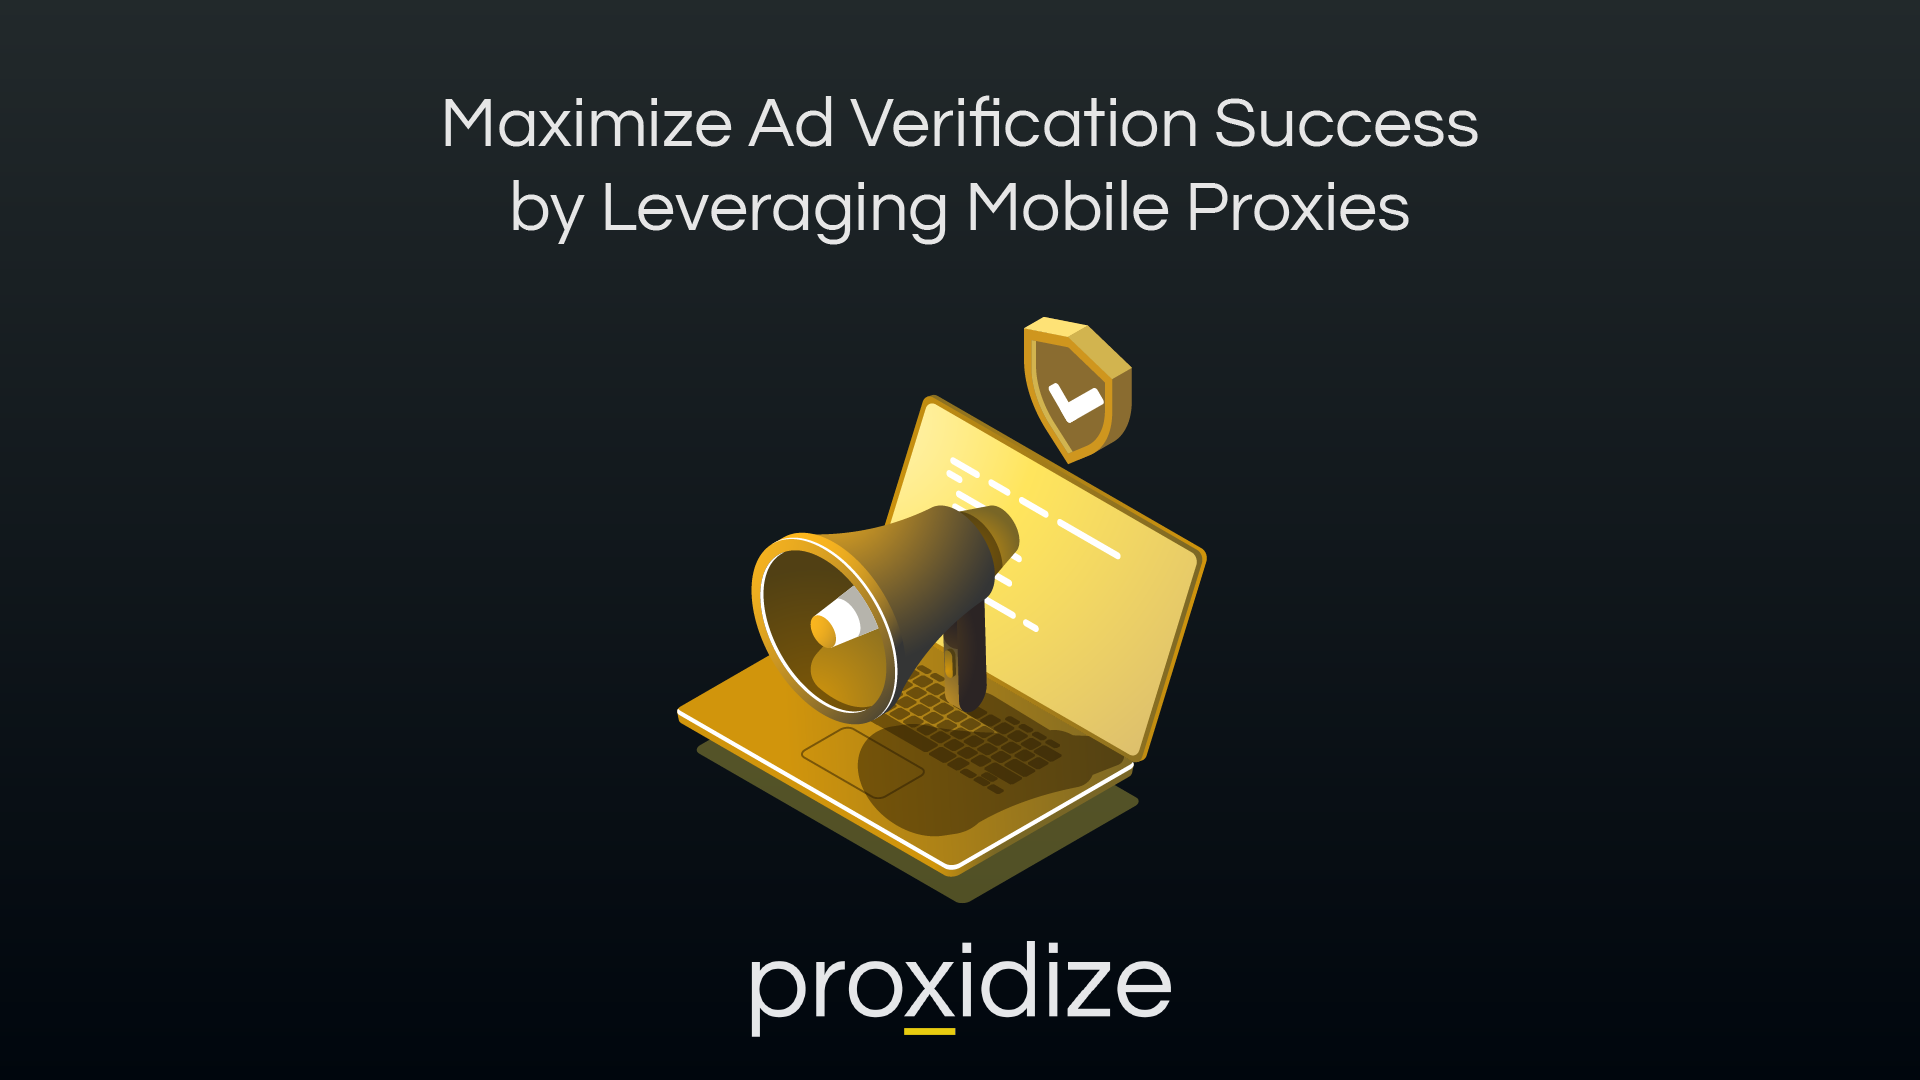 Maximize Ad Verification Success by Leveraging Mobile Proxies